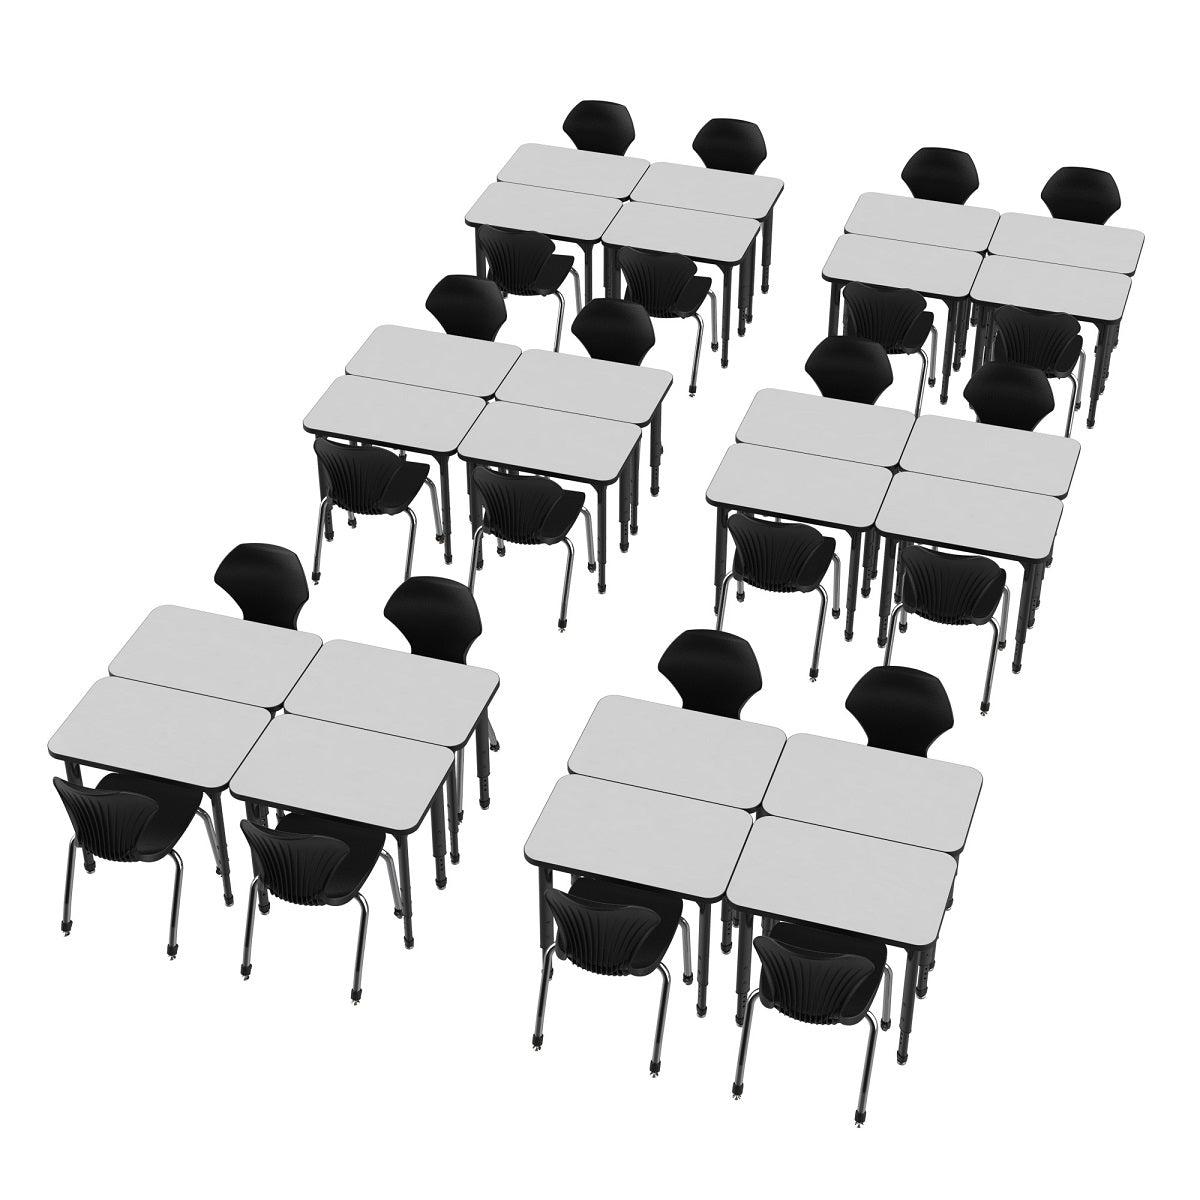 Apex Dry Erase Classroom Desk and Chair Package, 24 Rectangle Collaborative Student Desks, 24" x 36", with 24 Apex Stack Chairs